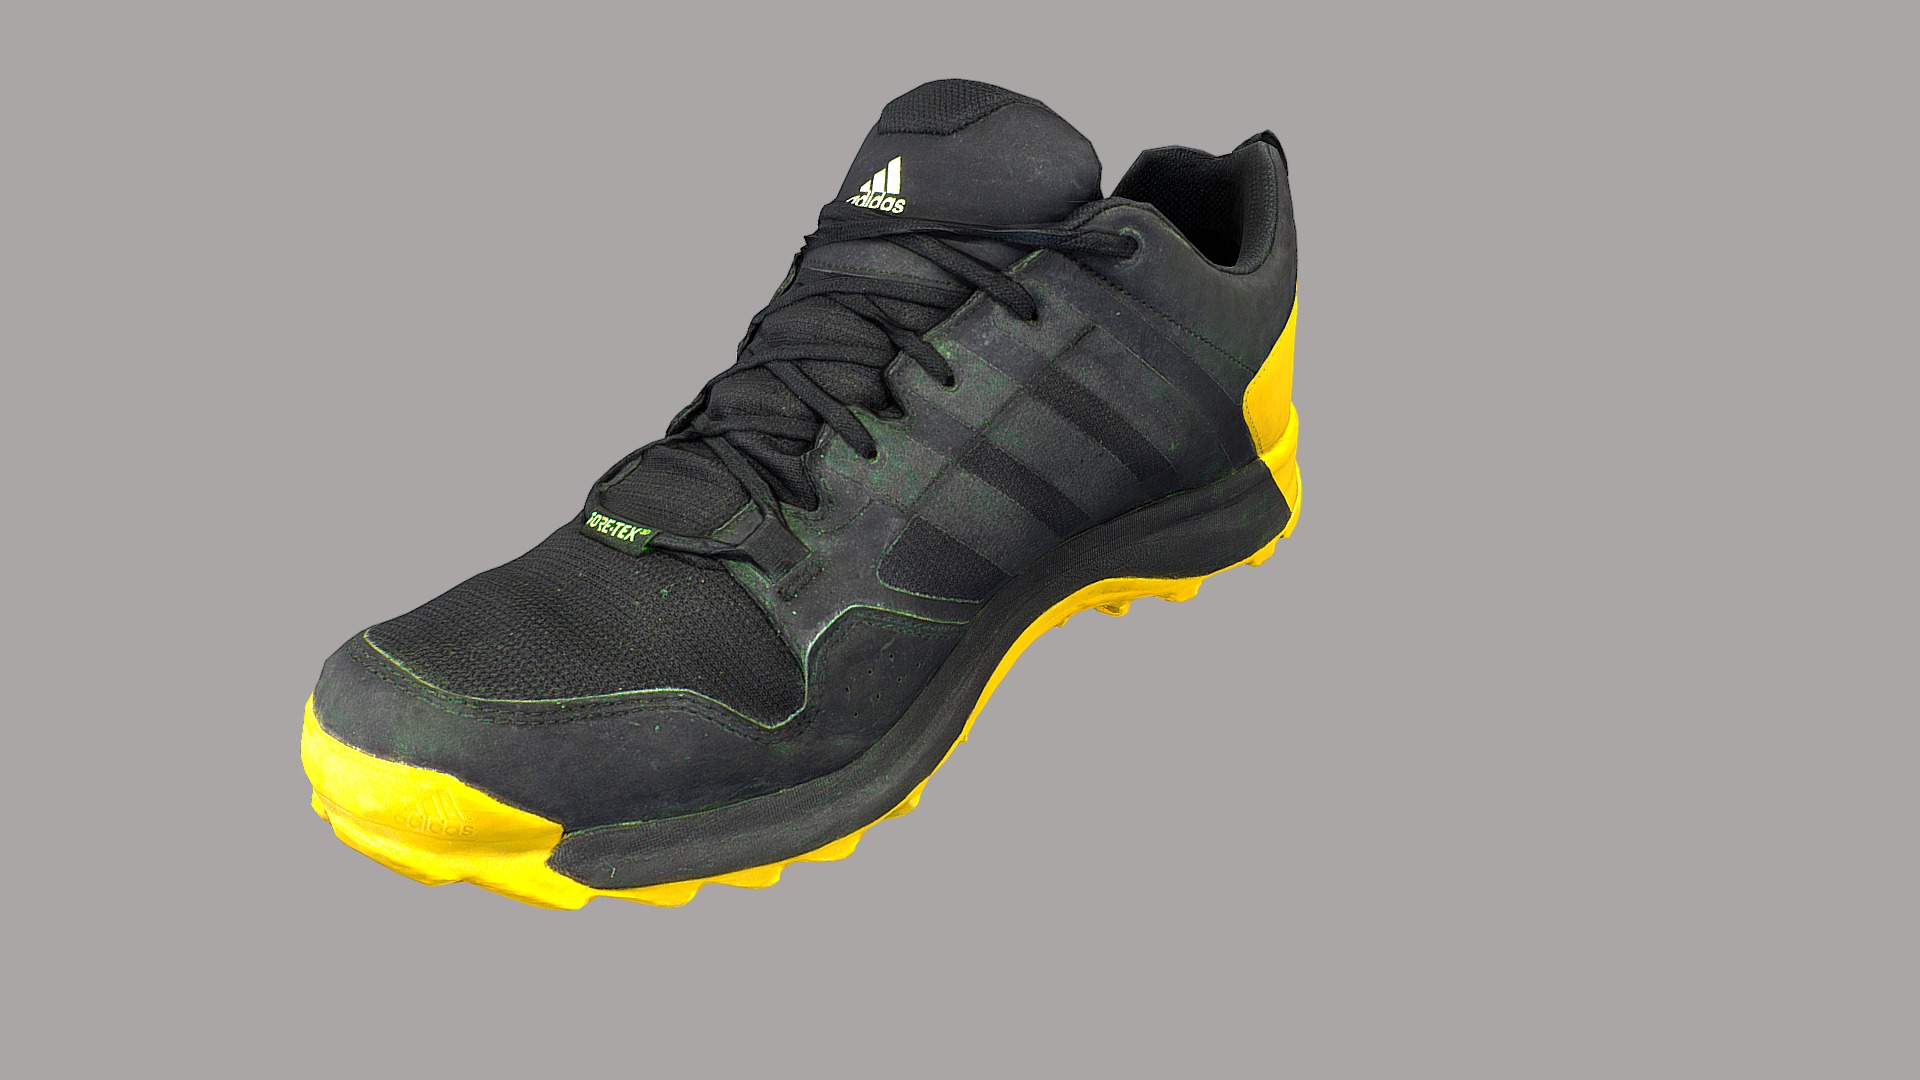 3D model Adidas sneaker shoe low poly - This is a 3D model of the Adidas sneaker shoe low poly. The 3D model is about a black and yellow shoe.